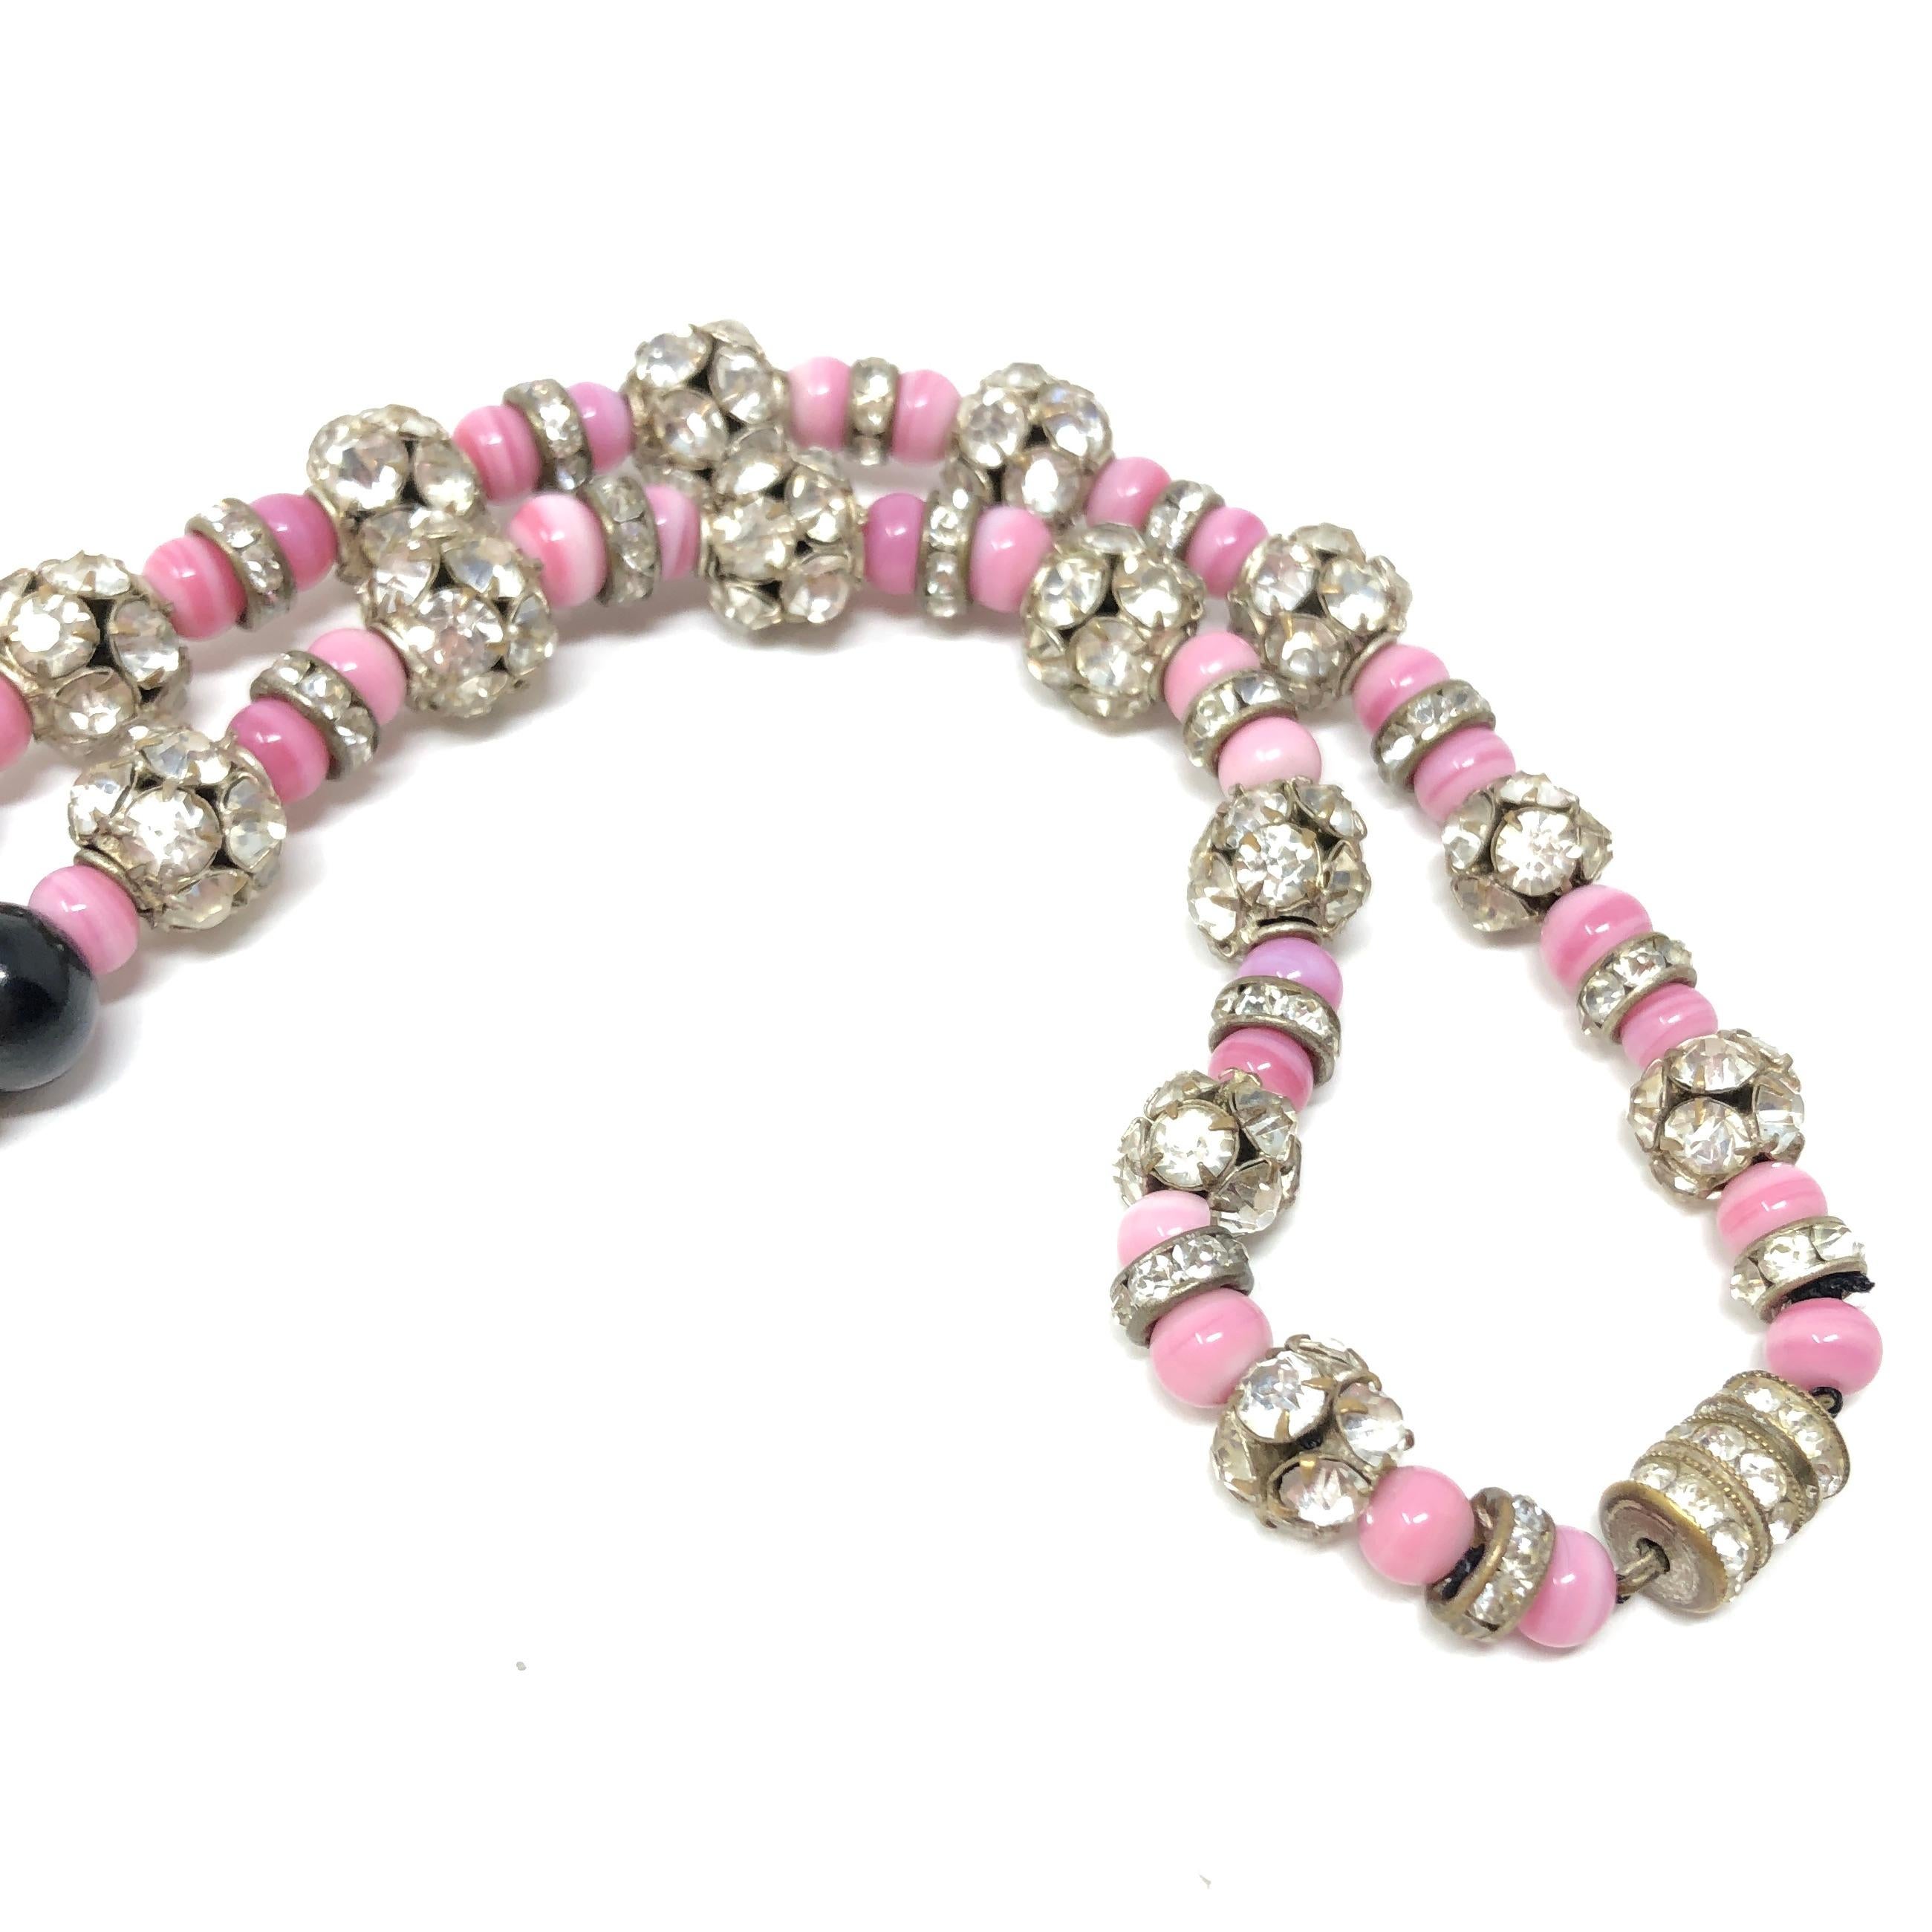 1920s Art Deco Pink and Black Glass Bead Rhinestone Vintage Flapper Necklace For Sale 5